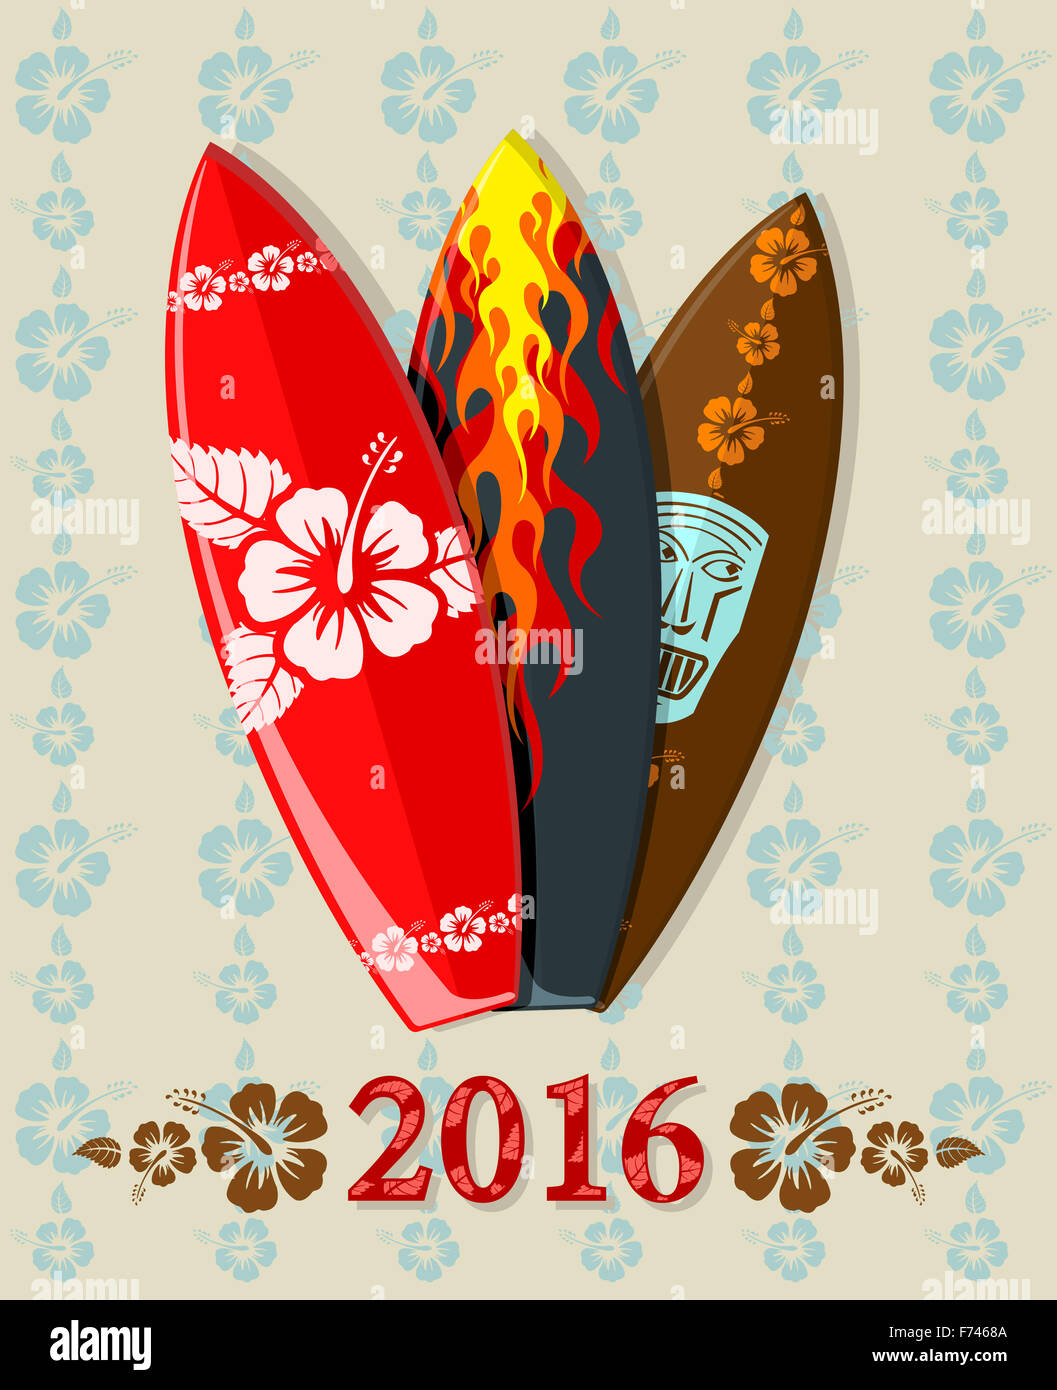 Illustration of aloha surf boards with 2016 text Stock Photo